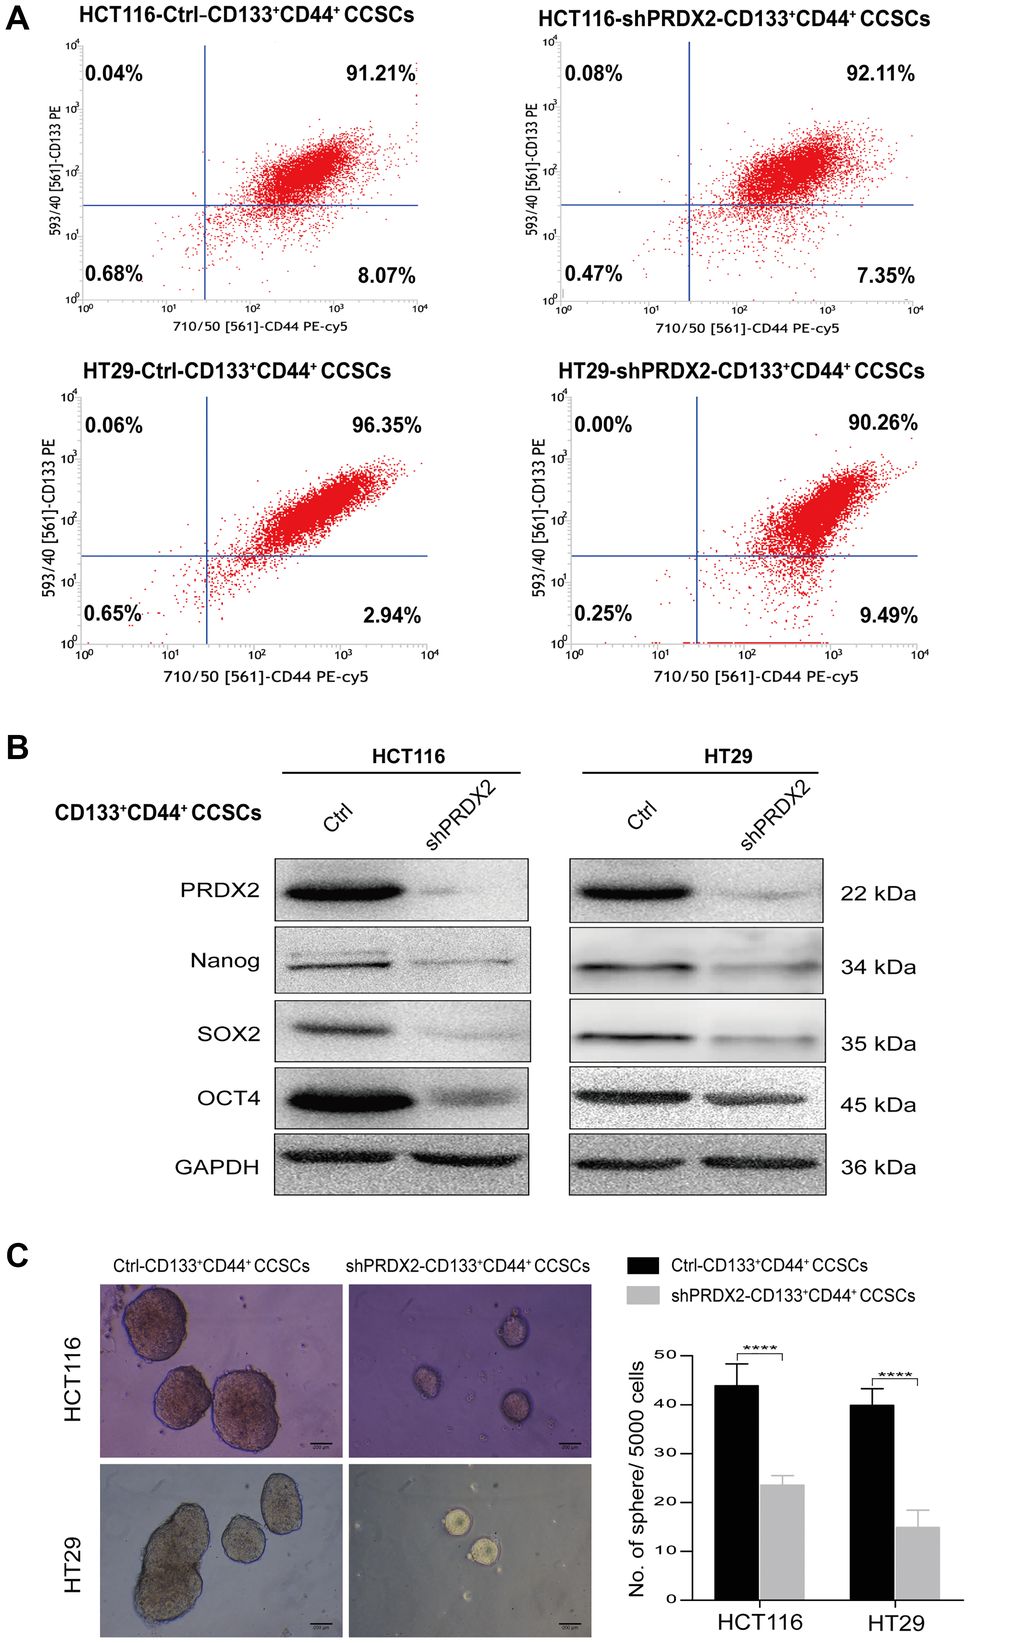 PRDX2 knockdown inhibits the self-renewal of CCSCs. (A) HCT116 and HT29 cell lines were first transfected with a lentiviral vector-mediated specific shRNA (shPRDX2) to silence PRDX2 or with a negative control lentivirus vector. Then, shPRDX2-CD133+CD44+ and control-CD133+CD44+ CCSCs were isolated from the transfected HCT116 and HT29 cells by magnetic bead sorting, which resulted in a considerable enrichment of CD133+CD44+ CCSCs (regular purity > 90%), as identified by flow cytometry with a PE-labeled anti-CD133 antibody and a PE-Cy5-labeled anti-CD44 antibody. (B) Western blot analysis of PRDX2 expression and the protein expression levels of stemness-related genes such as Nanog and Sox2 in CD133+CD44+ CCSCs generated from HCT116/HT29 control or shPRDX2 cells. GAPDH was used as the loading control. (C) Left panel: Representative image of spheres formed from CD133+CD44+ CCSCs derived from HCT116/HT29 control or shPRDX2 cells. Right panel: The number of cell spheres per 5000 cells was counted. The data are presented as the means ± SD of sphere numbers from three independent experiments performed in triplicate. Statistical analysis: Student’s t-test, ****p 